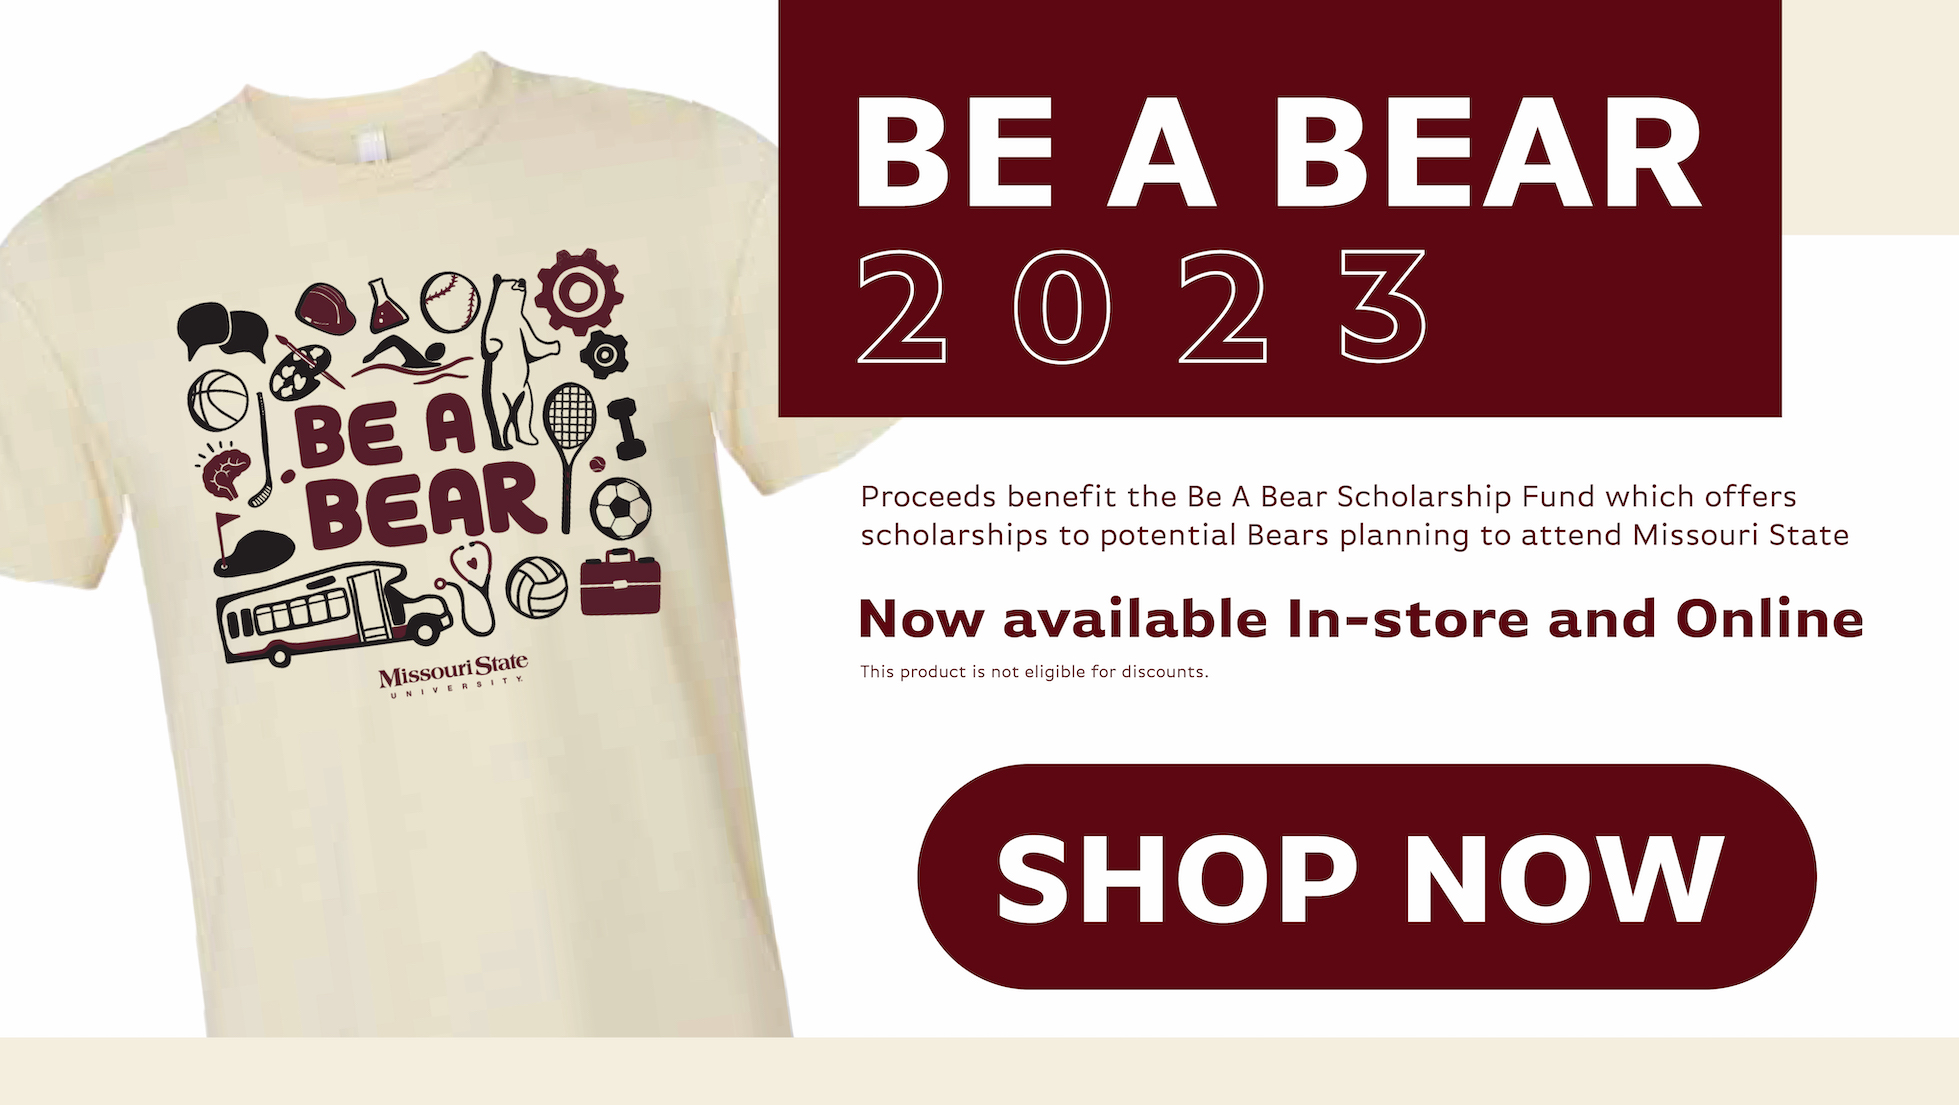 Be A Bear 2023. Proceeds benefit the Be A Bear Scholarship Fund which offers scholarships to potential Bears planning to attend Missouri State. Now available In-store and Online. this product is not eligible for discounts. Shop Now.